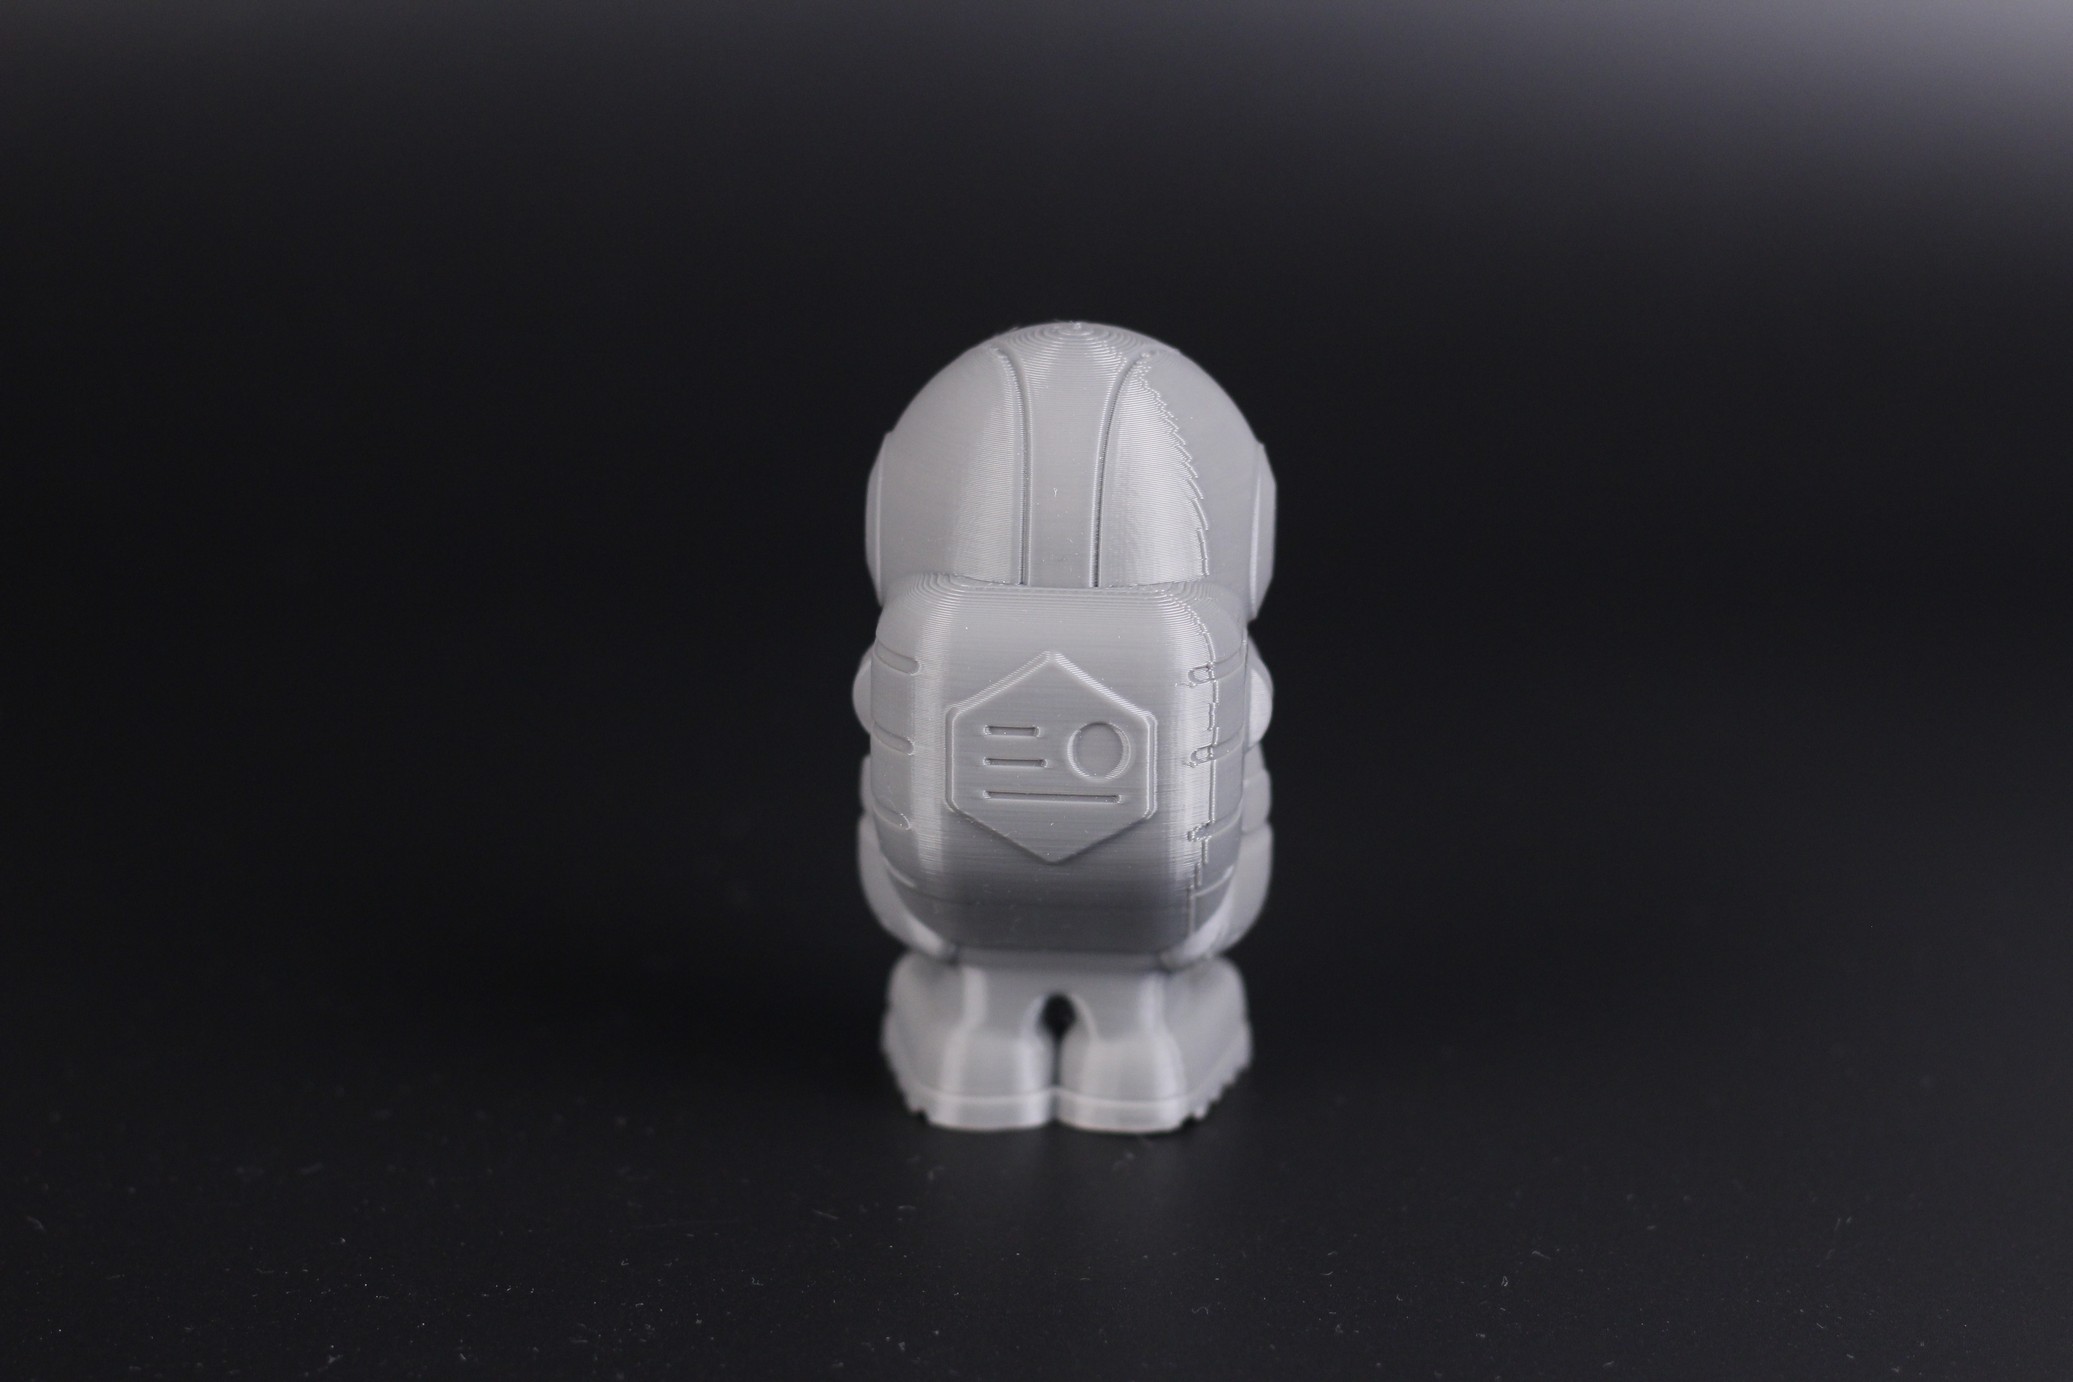 Anycubic Kobra PLA model Phil A Ment 2 | Anycubic Kobra Review: The New Budget Standard